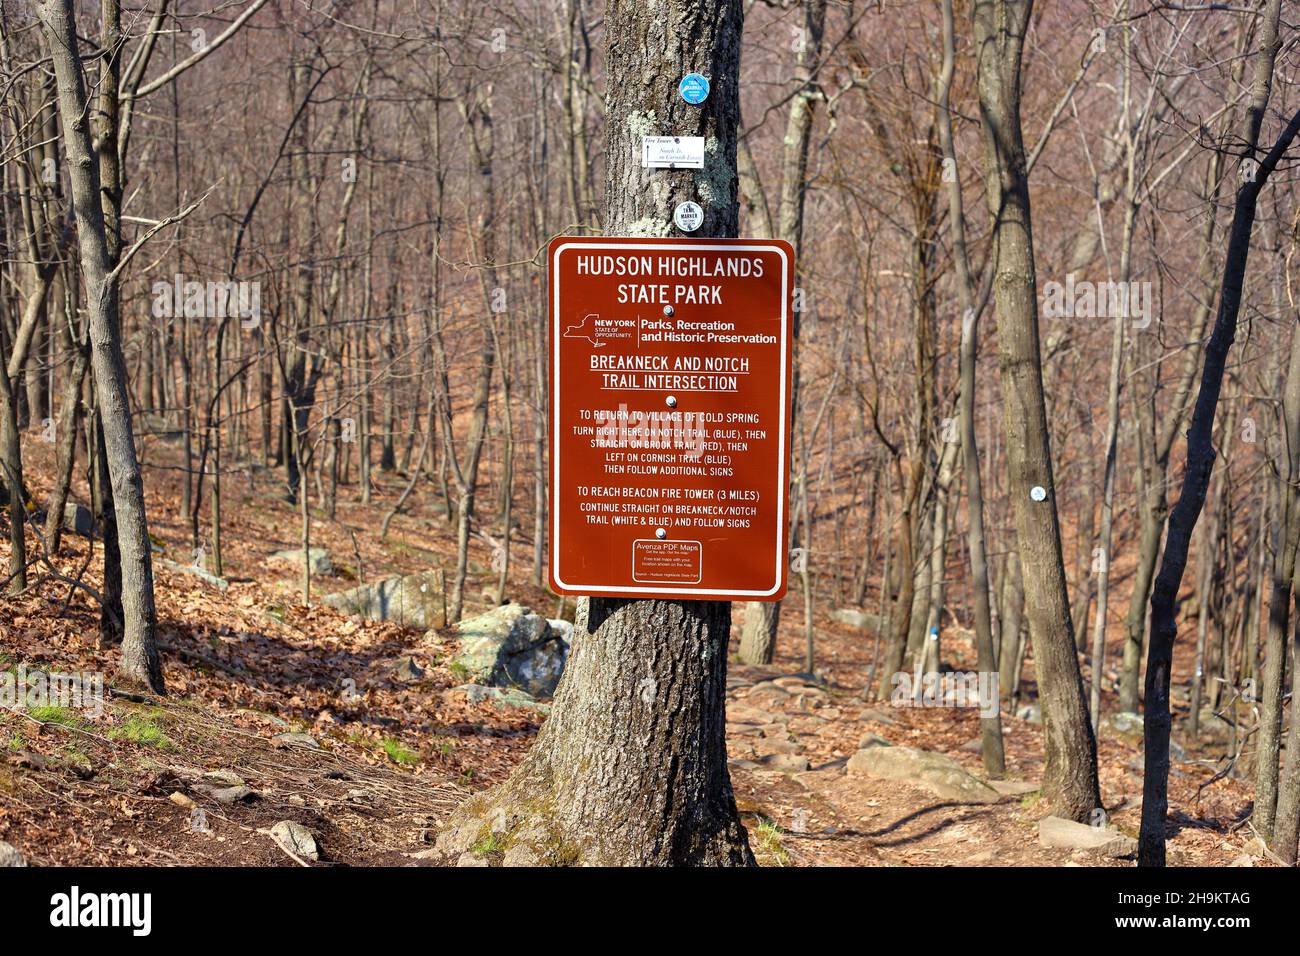 Trail markers, and signage on a tree along the Breakneck Ridge and Notch trails in Hudson Highlands State Park, New York. Stock Photo